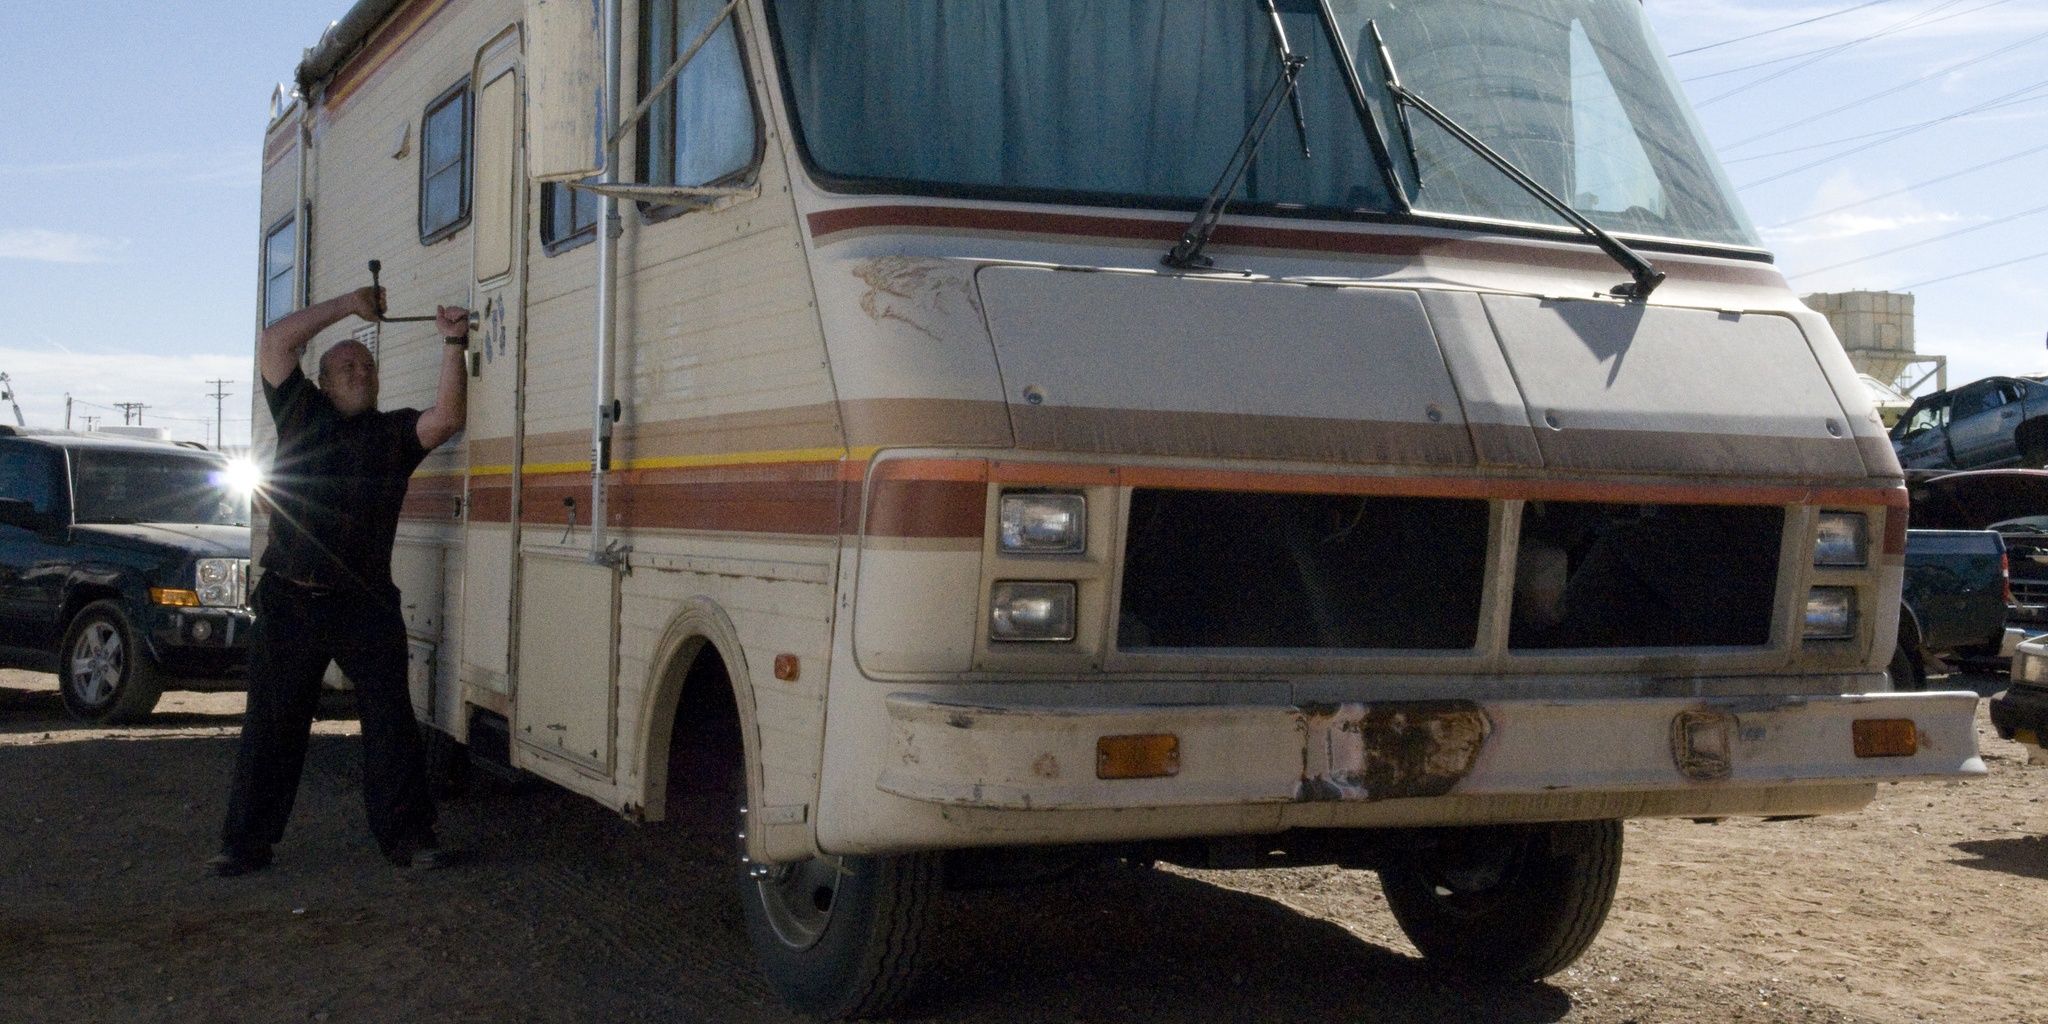 Hank trying to break into the iconic RV from Breaking Bad